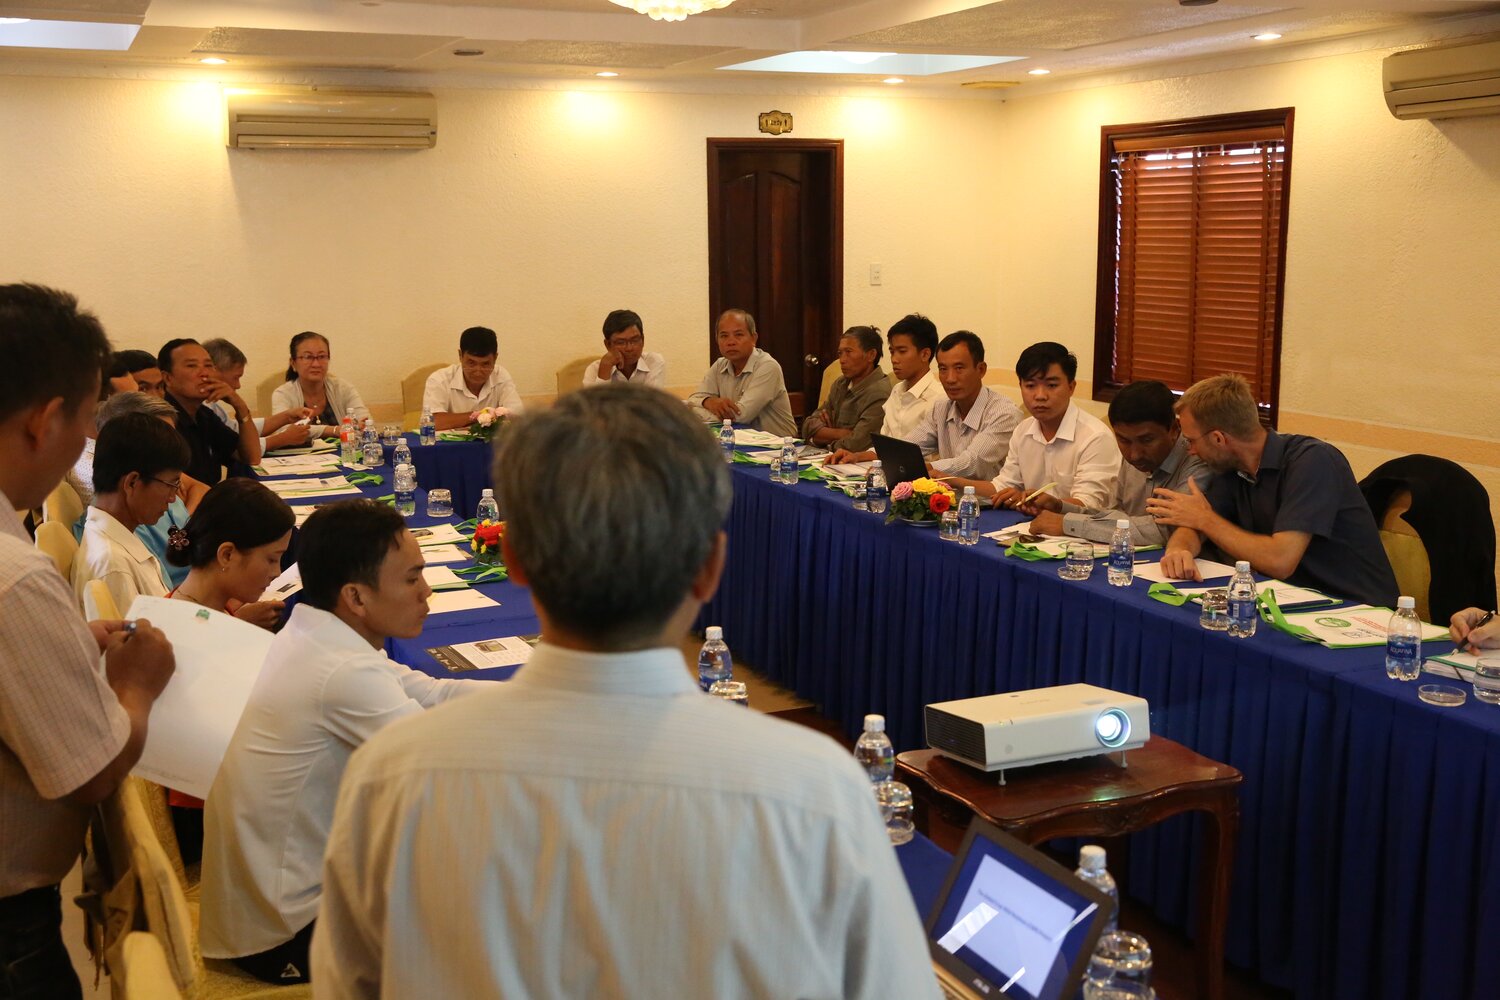 In a meeting organized by our Crop Wild Relatives partner, Professor Huynh Quang Tin, from the Mekong Delta Development Research Institute, representatives from 13 Seed Clubs (eight provinces) discussed the latest results of their rice pre-breeding trials – challenges faced, outcomes from the first crop cycle, and the selection of the most promising lines. “It was wonderful to meet these farmer-breeders who are selecting new materials that can thrive in local conditions and benefit the whole region,” said Ben Kilian, Senior Scientist at the Crop Trust. Photo: L.M. Salazar 